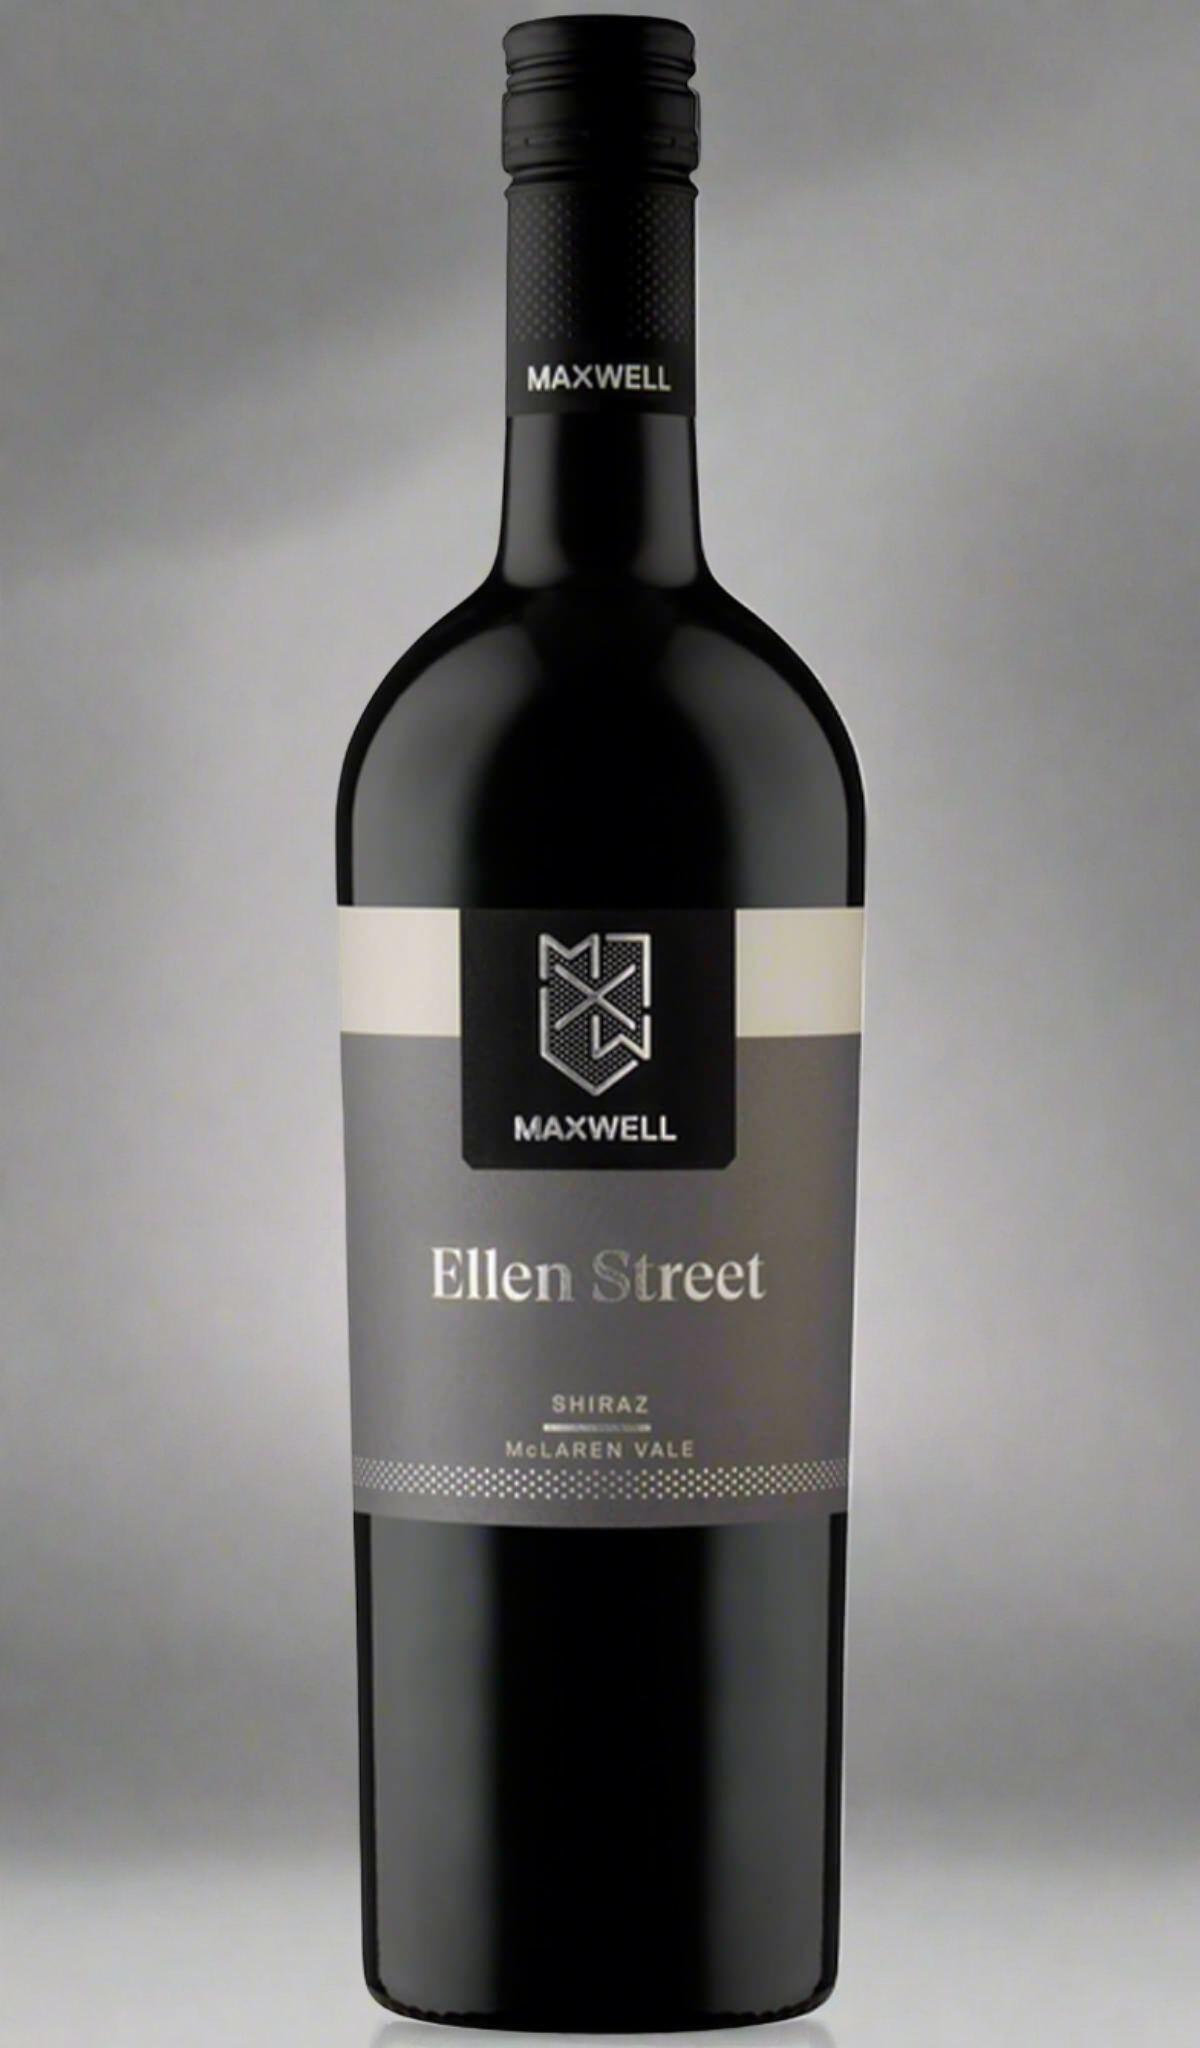 Find out more, explore the range and buy Maxwell Ellen Street Shiraz 2020 (McLaren Vale) available online at Wine Sellers Direct - Australia's independent liquor specialists.